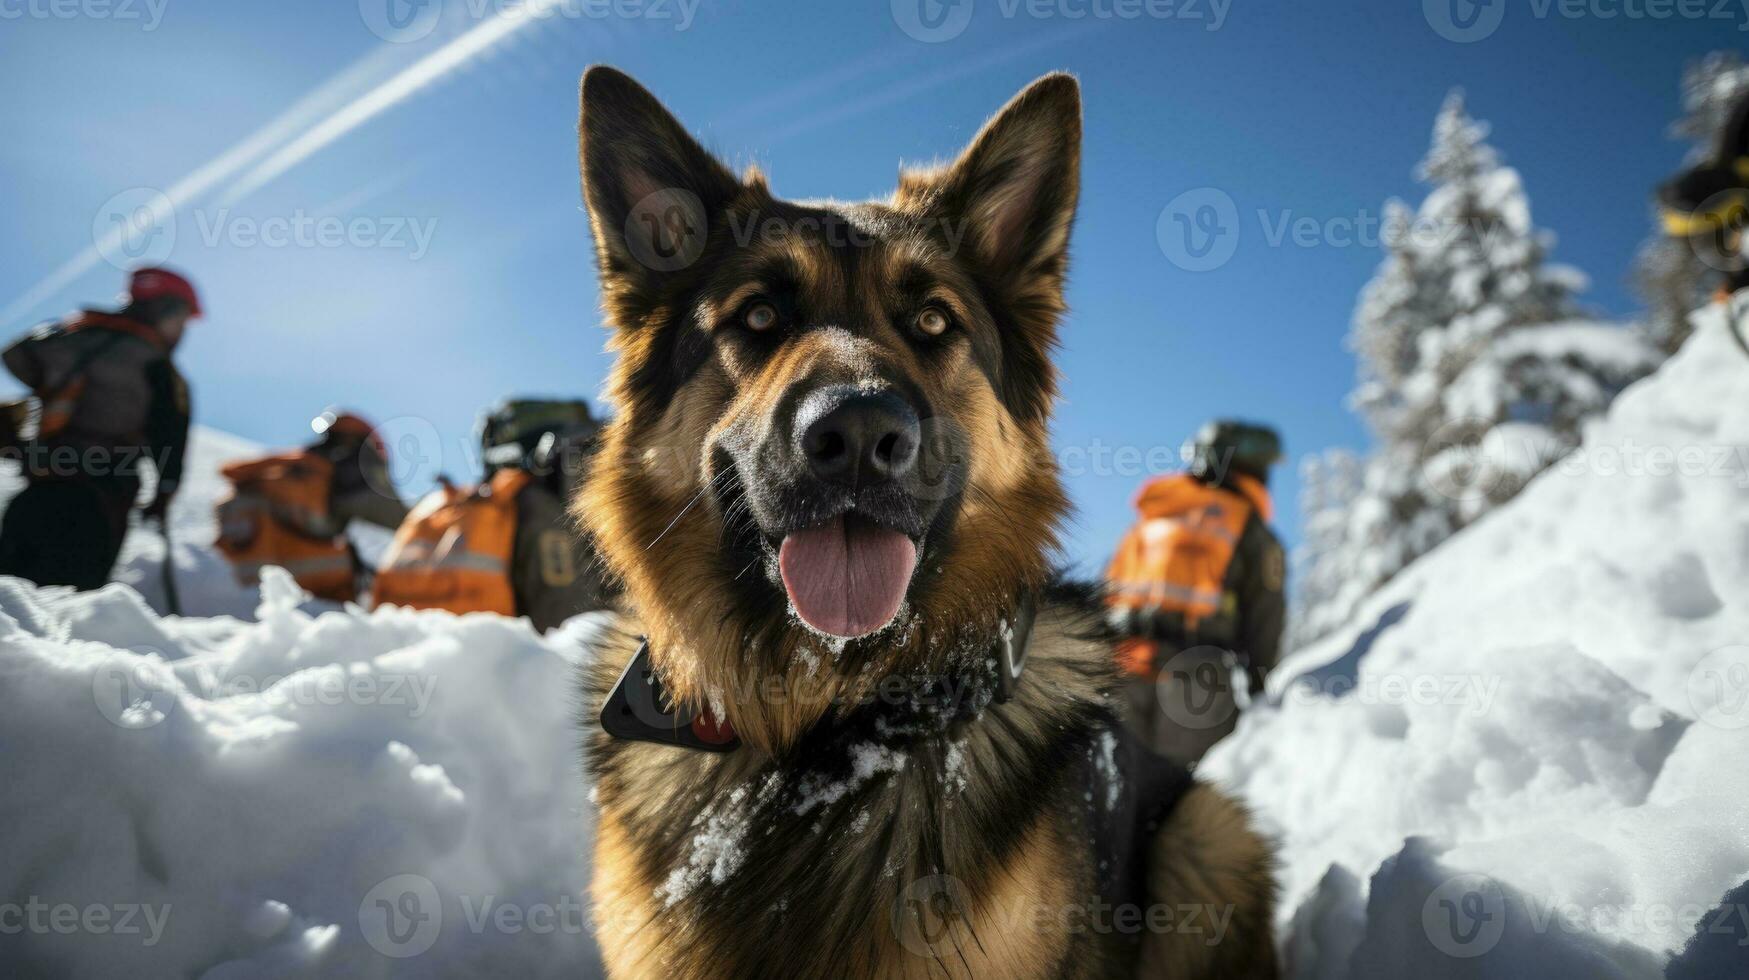 Rescue dogs diligently searching snowy terrain during alpine rescue mission photo